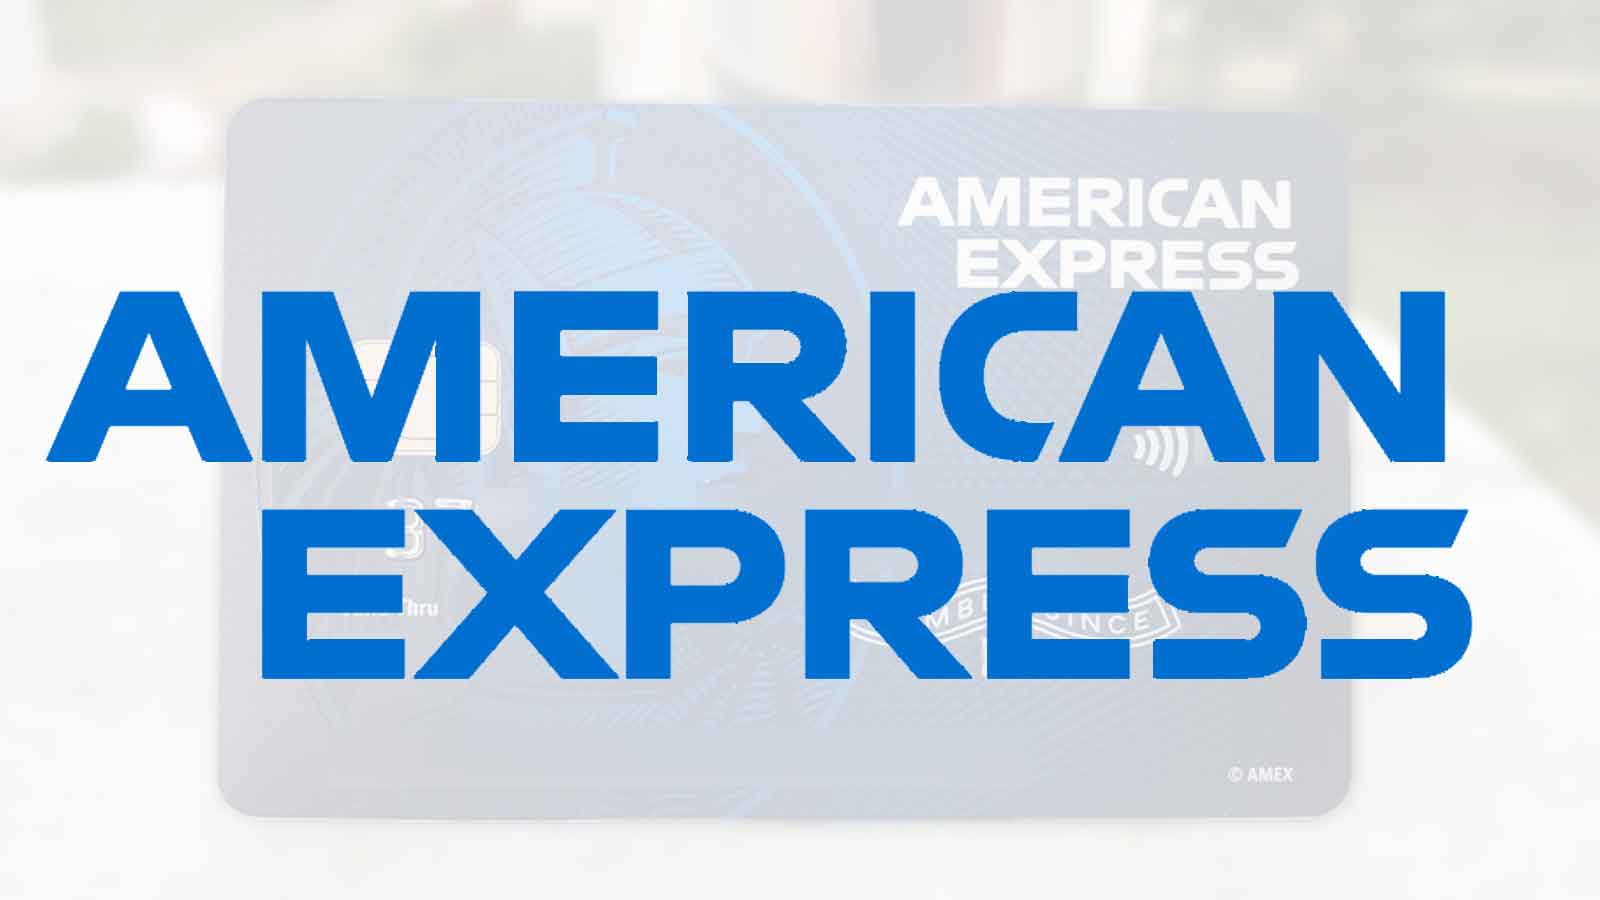 American Express is Hiring Experienced Software Engineers | Apply now